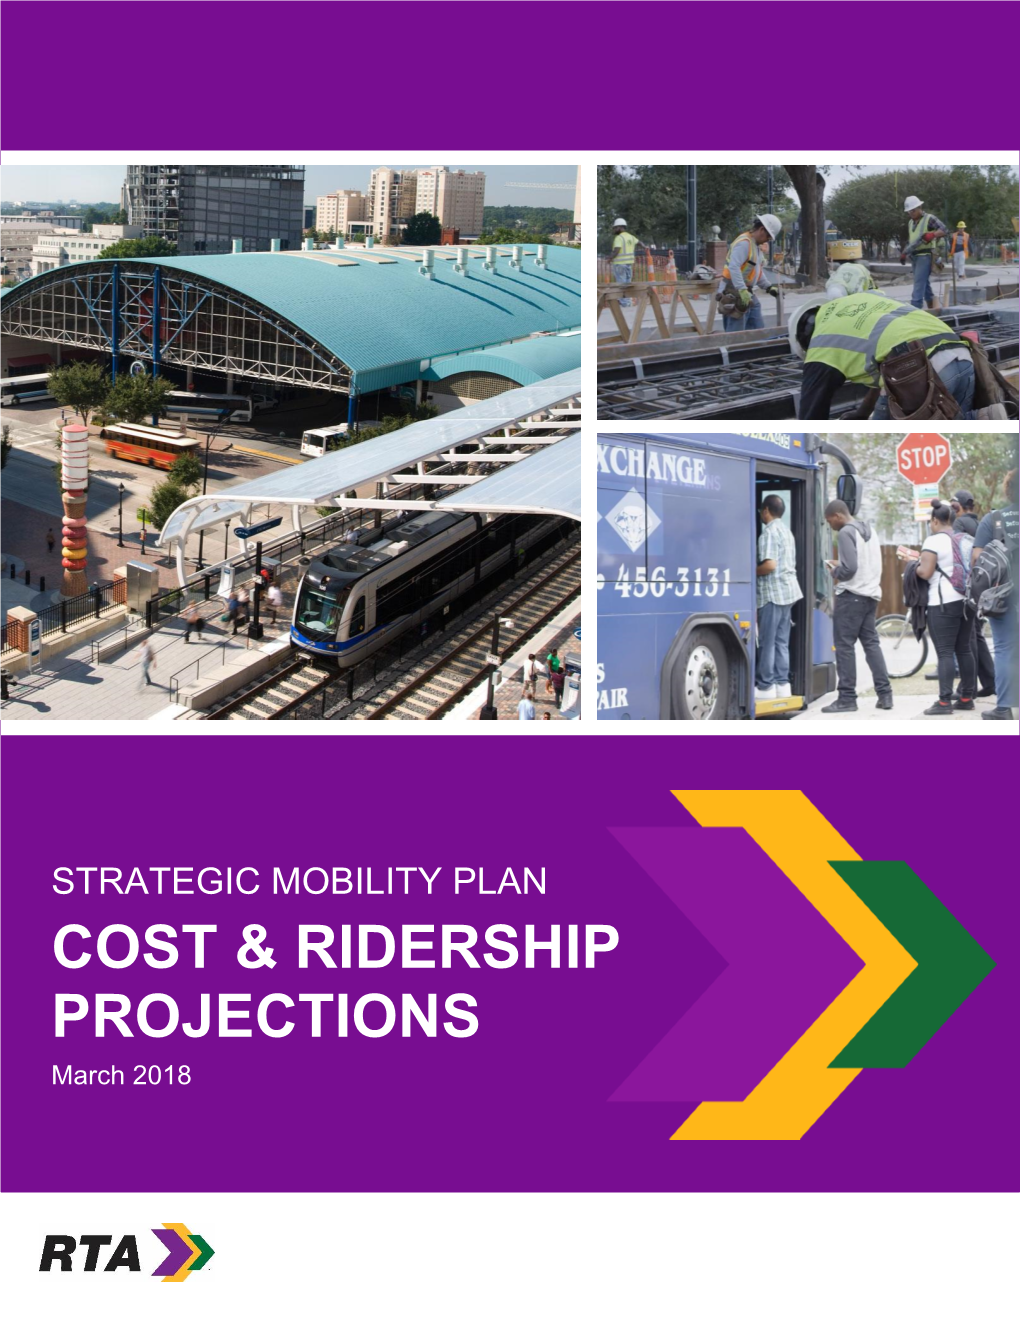 Cost & Ridership Projections